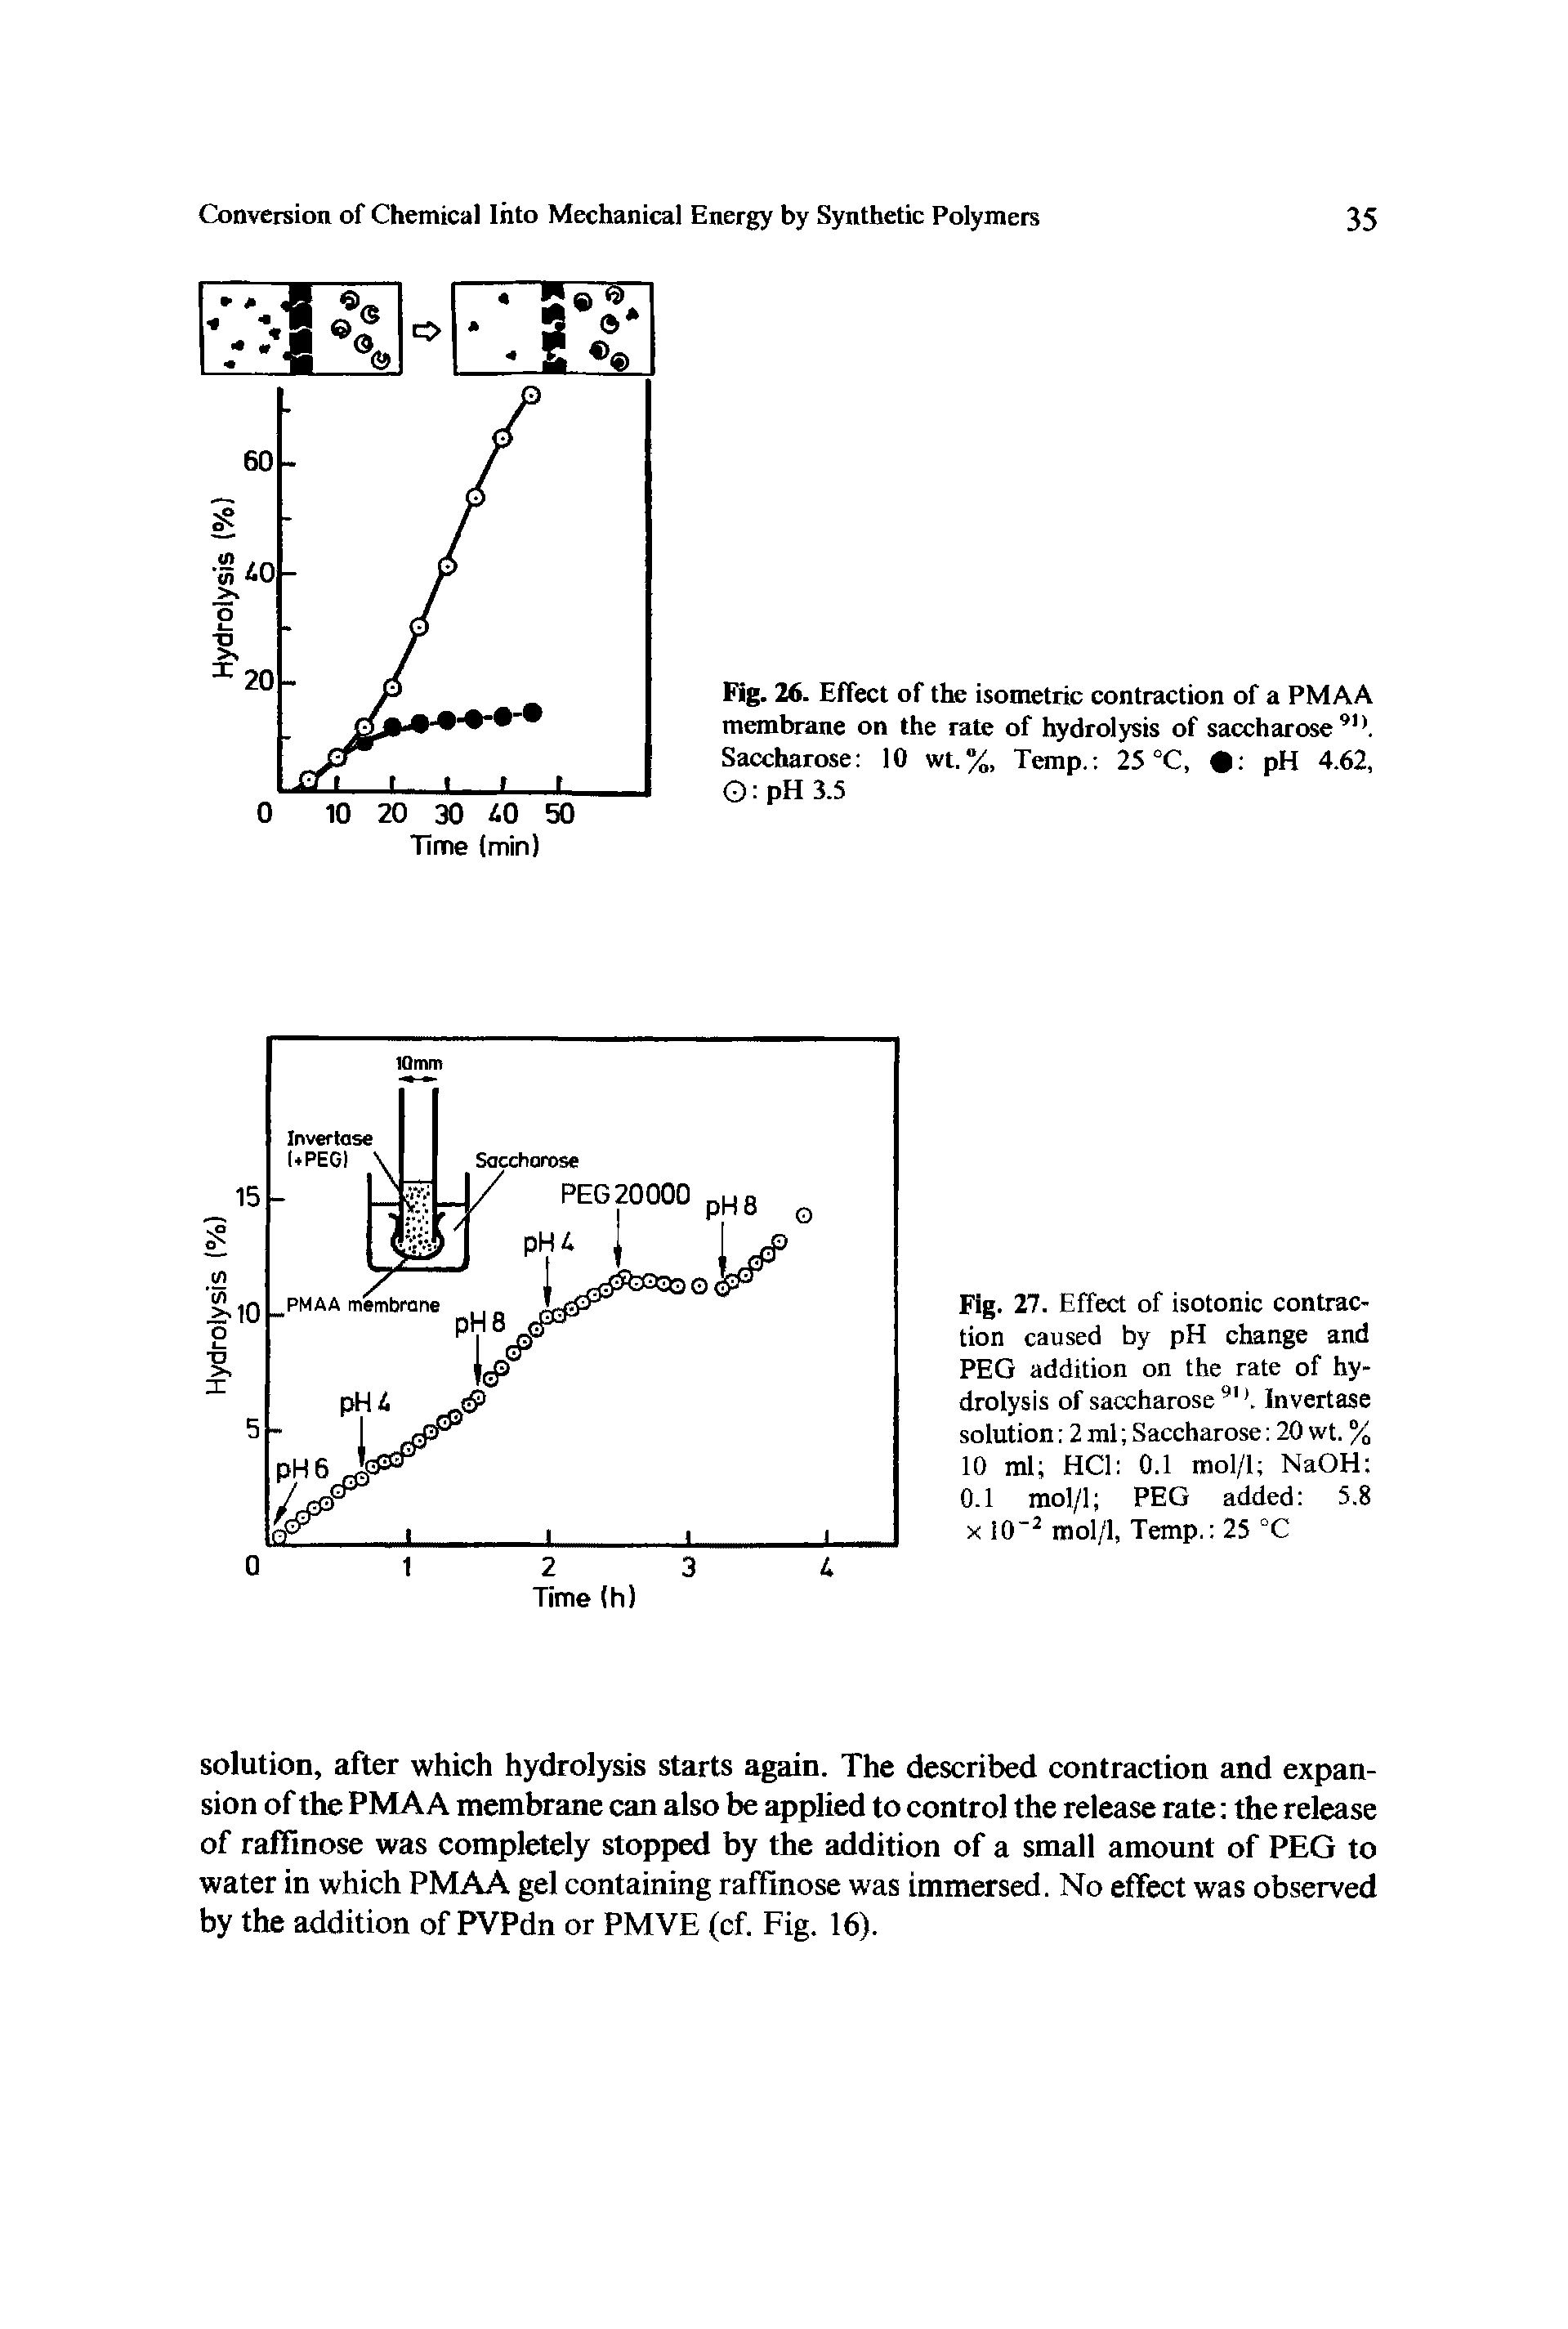 Fig. 27. Effect of isotonic contraction caused by pH change and PEG addition on the rate of hydrolysis of saccharose. Invertase solution 2 ml Saccharose 20 wt. % 10 ml HCl 0.1 mol/1 NaOH 0.1 raol/1 PEG added 5.8 X iO mol/1, Temp. 25 °C...